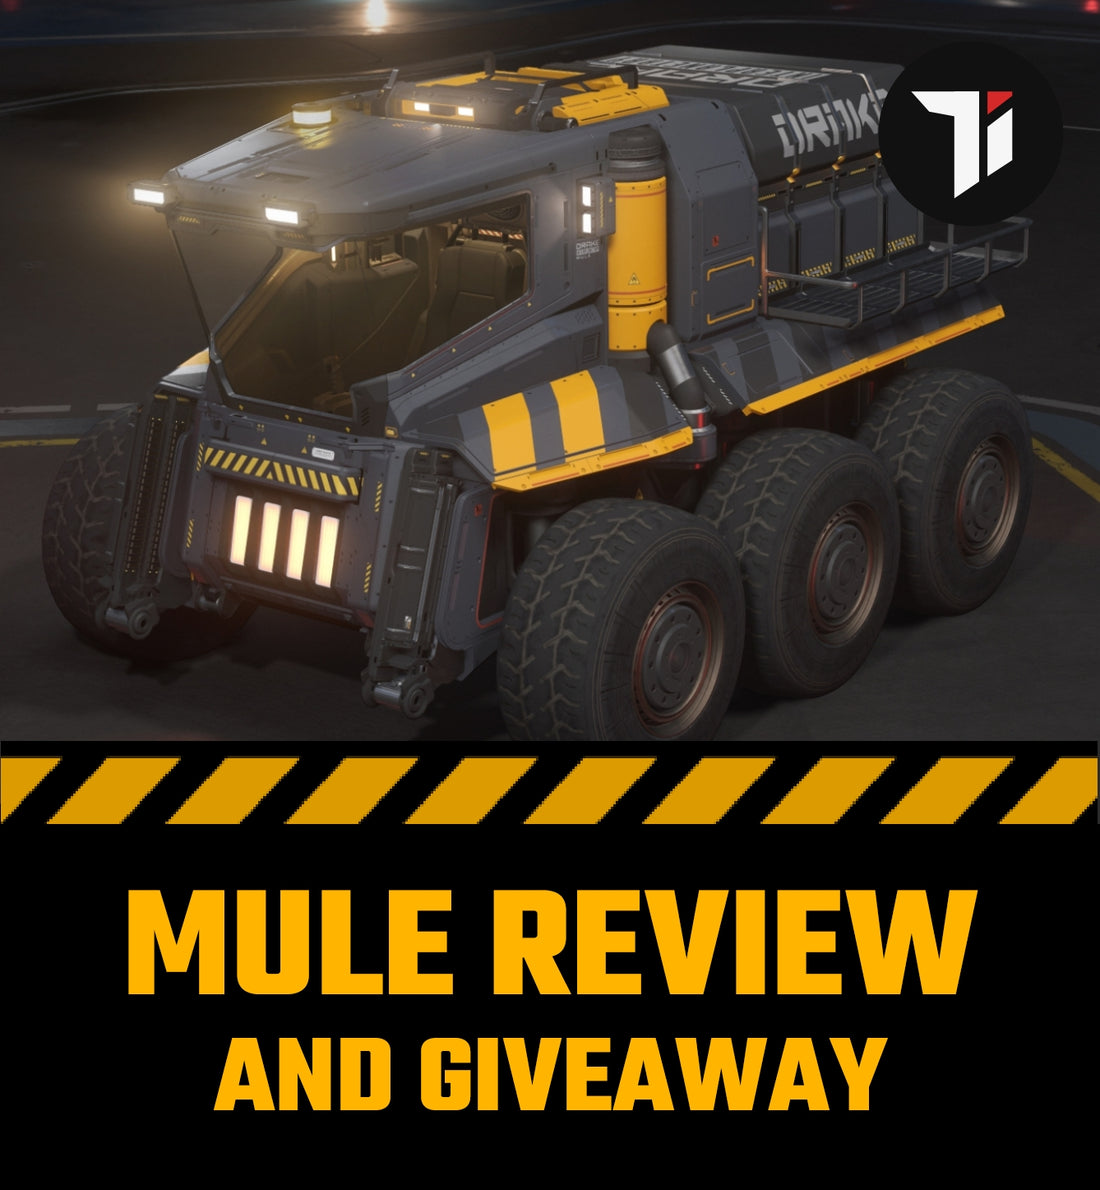 Drake Mule Review and Giveaway - Win LTI Mule for the game Star Citizen